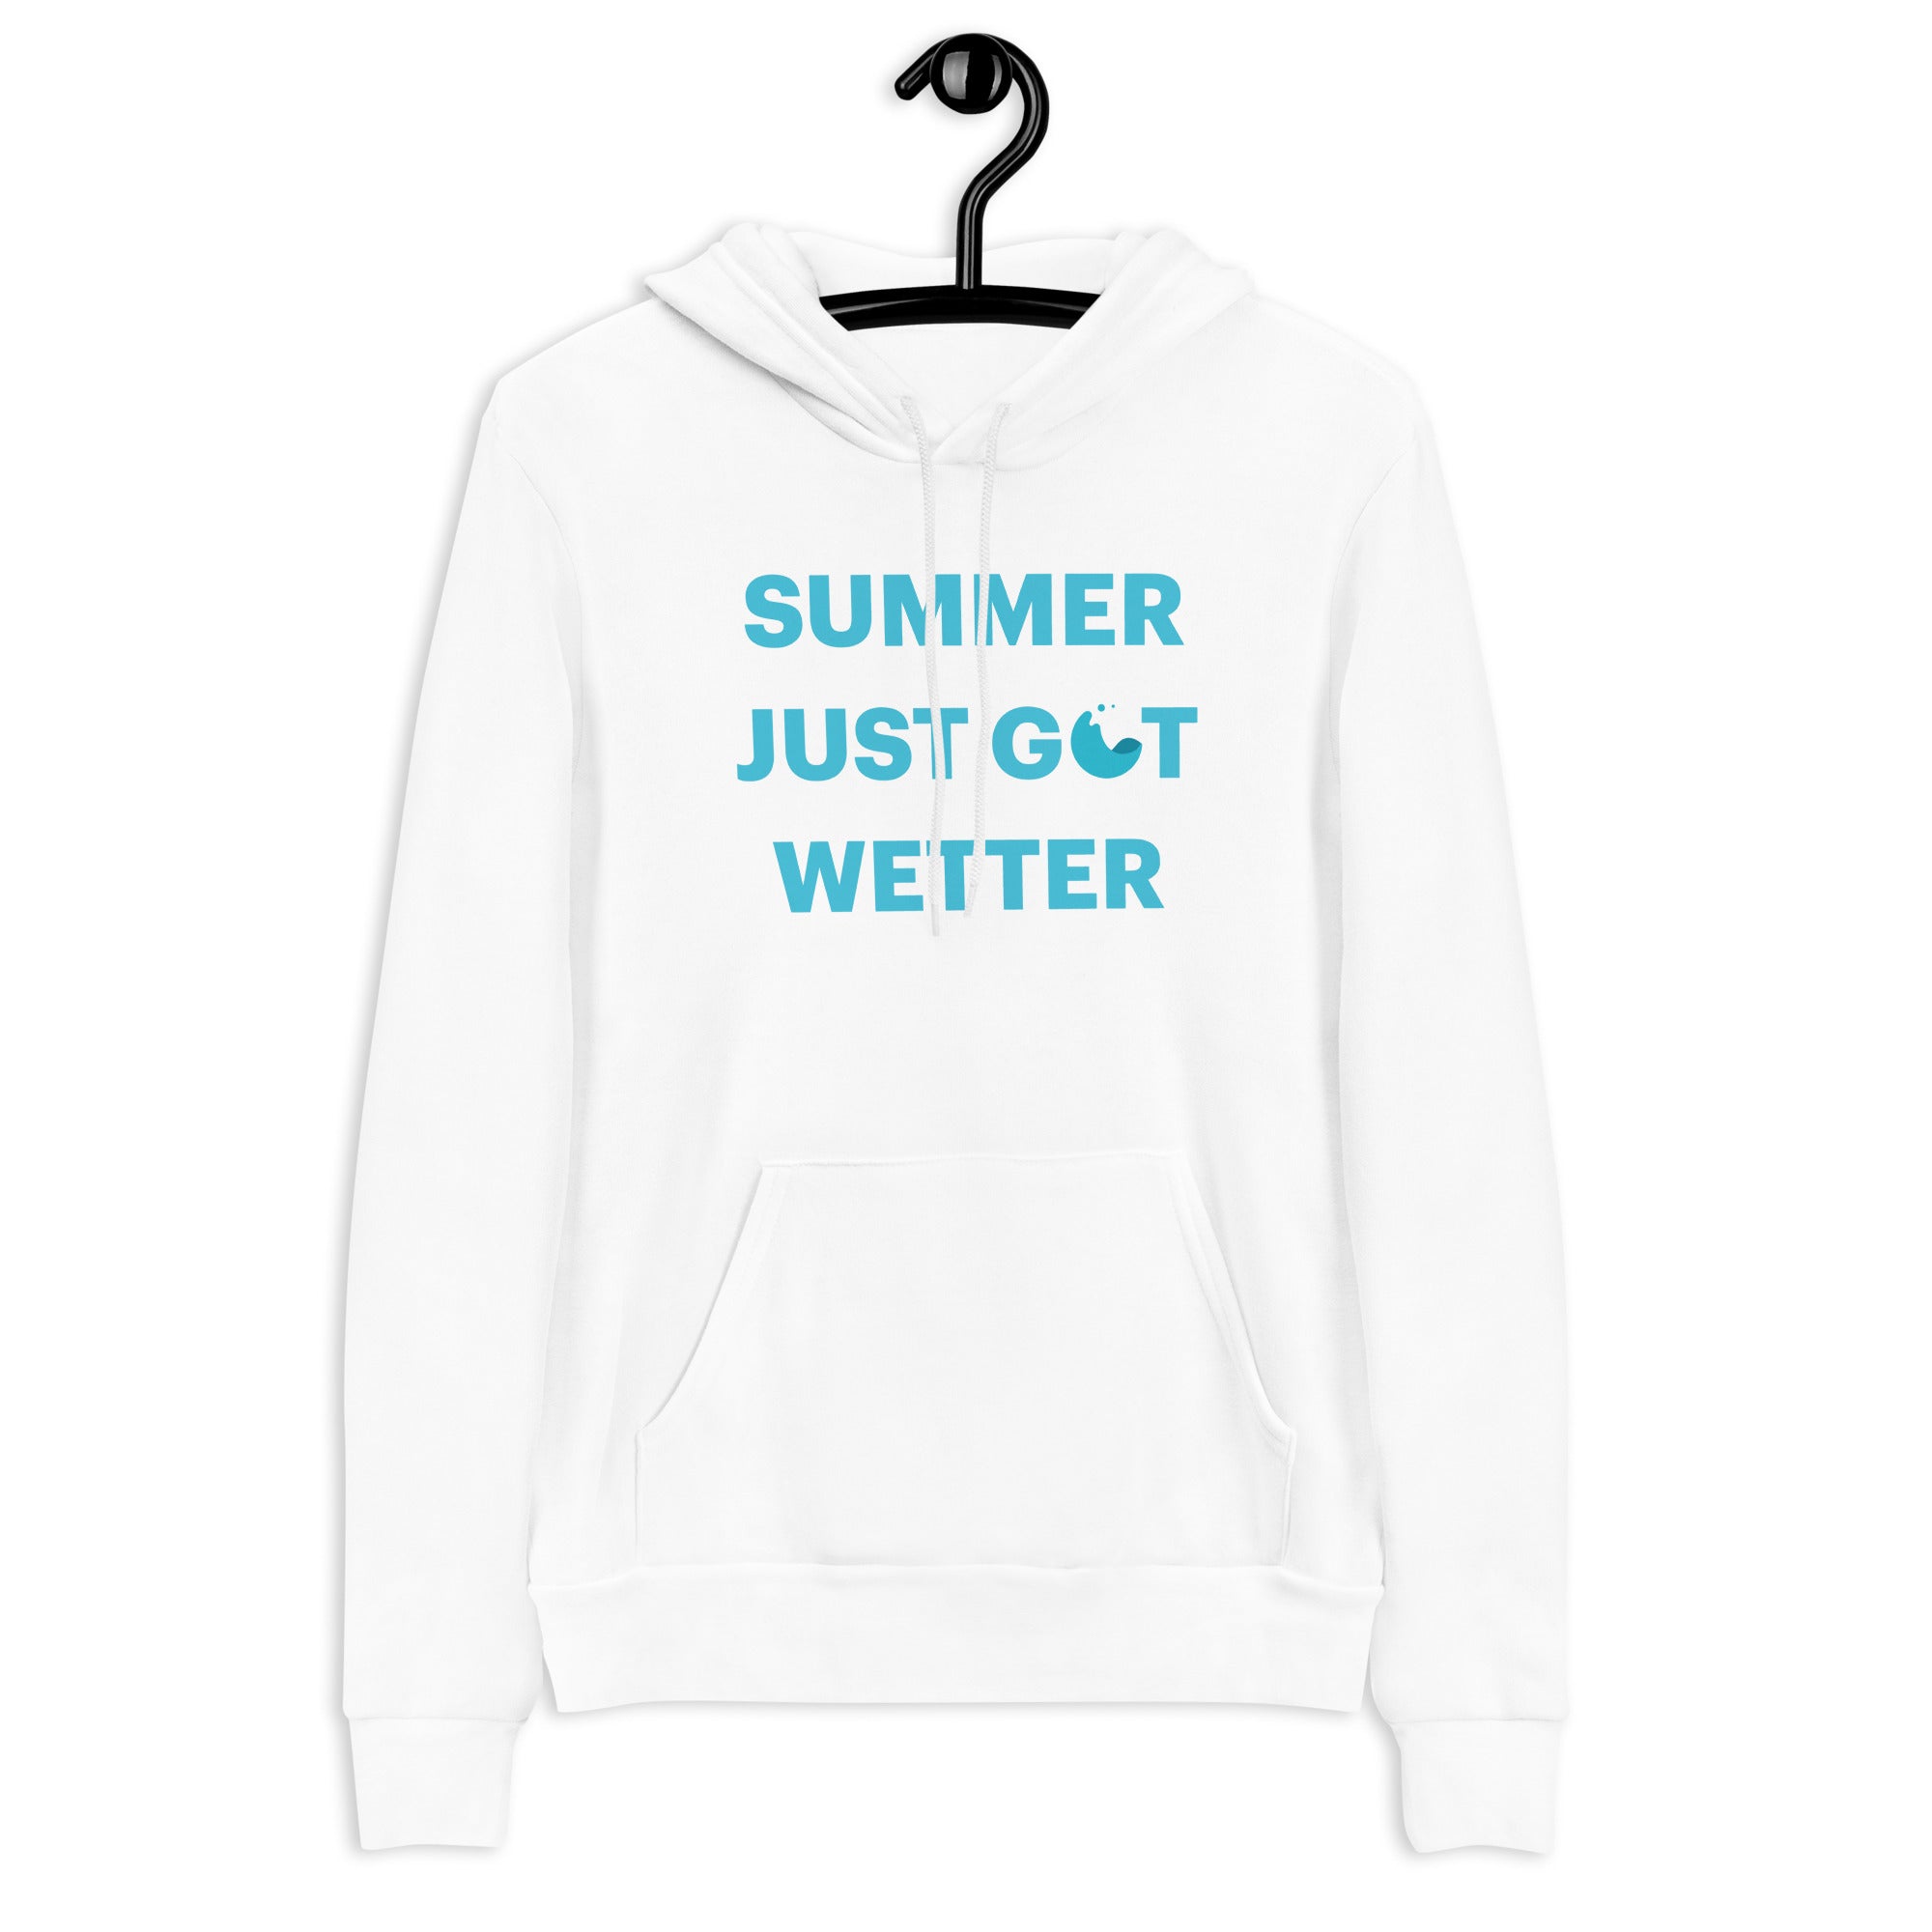 Dezo "Summer Just Got Wetter" Hoodie LIMITED EDITION